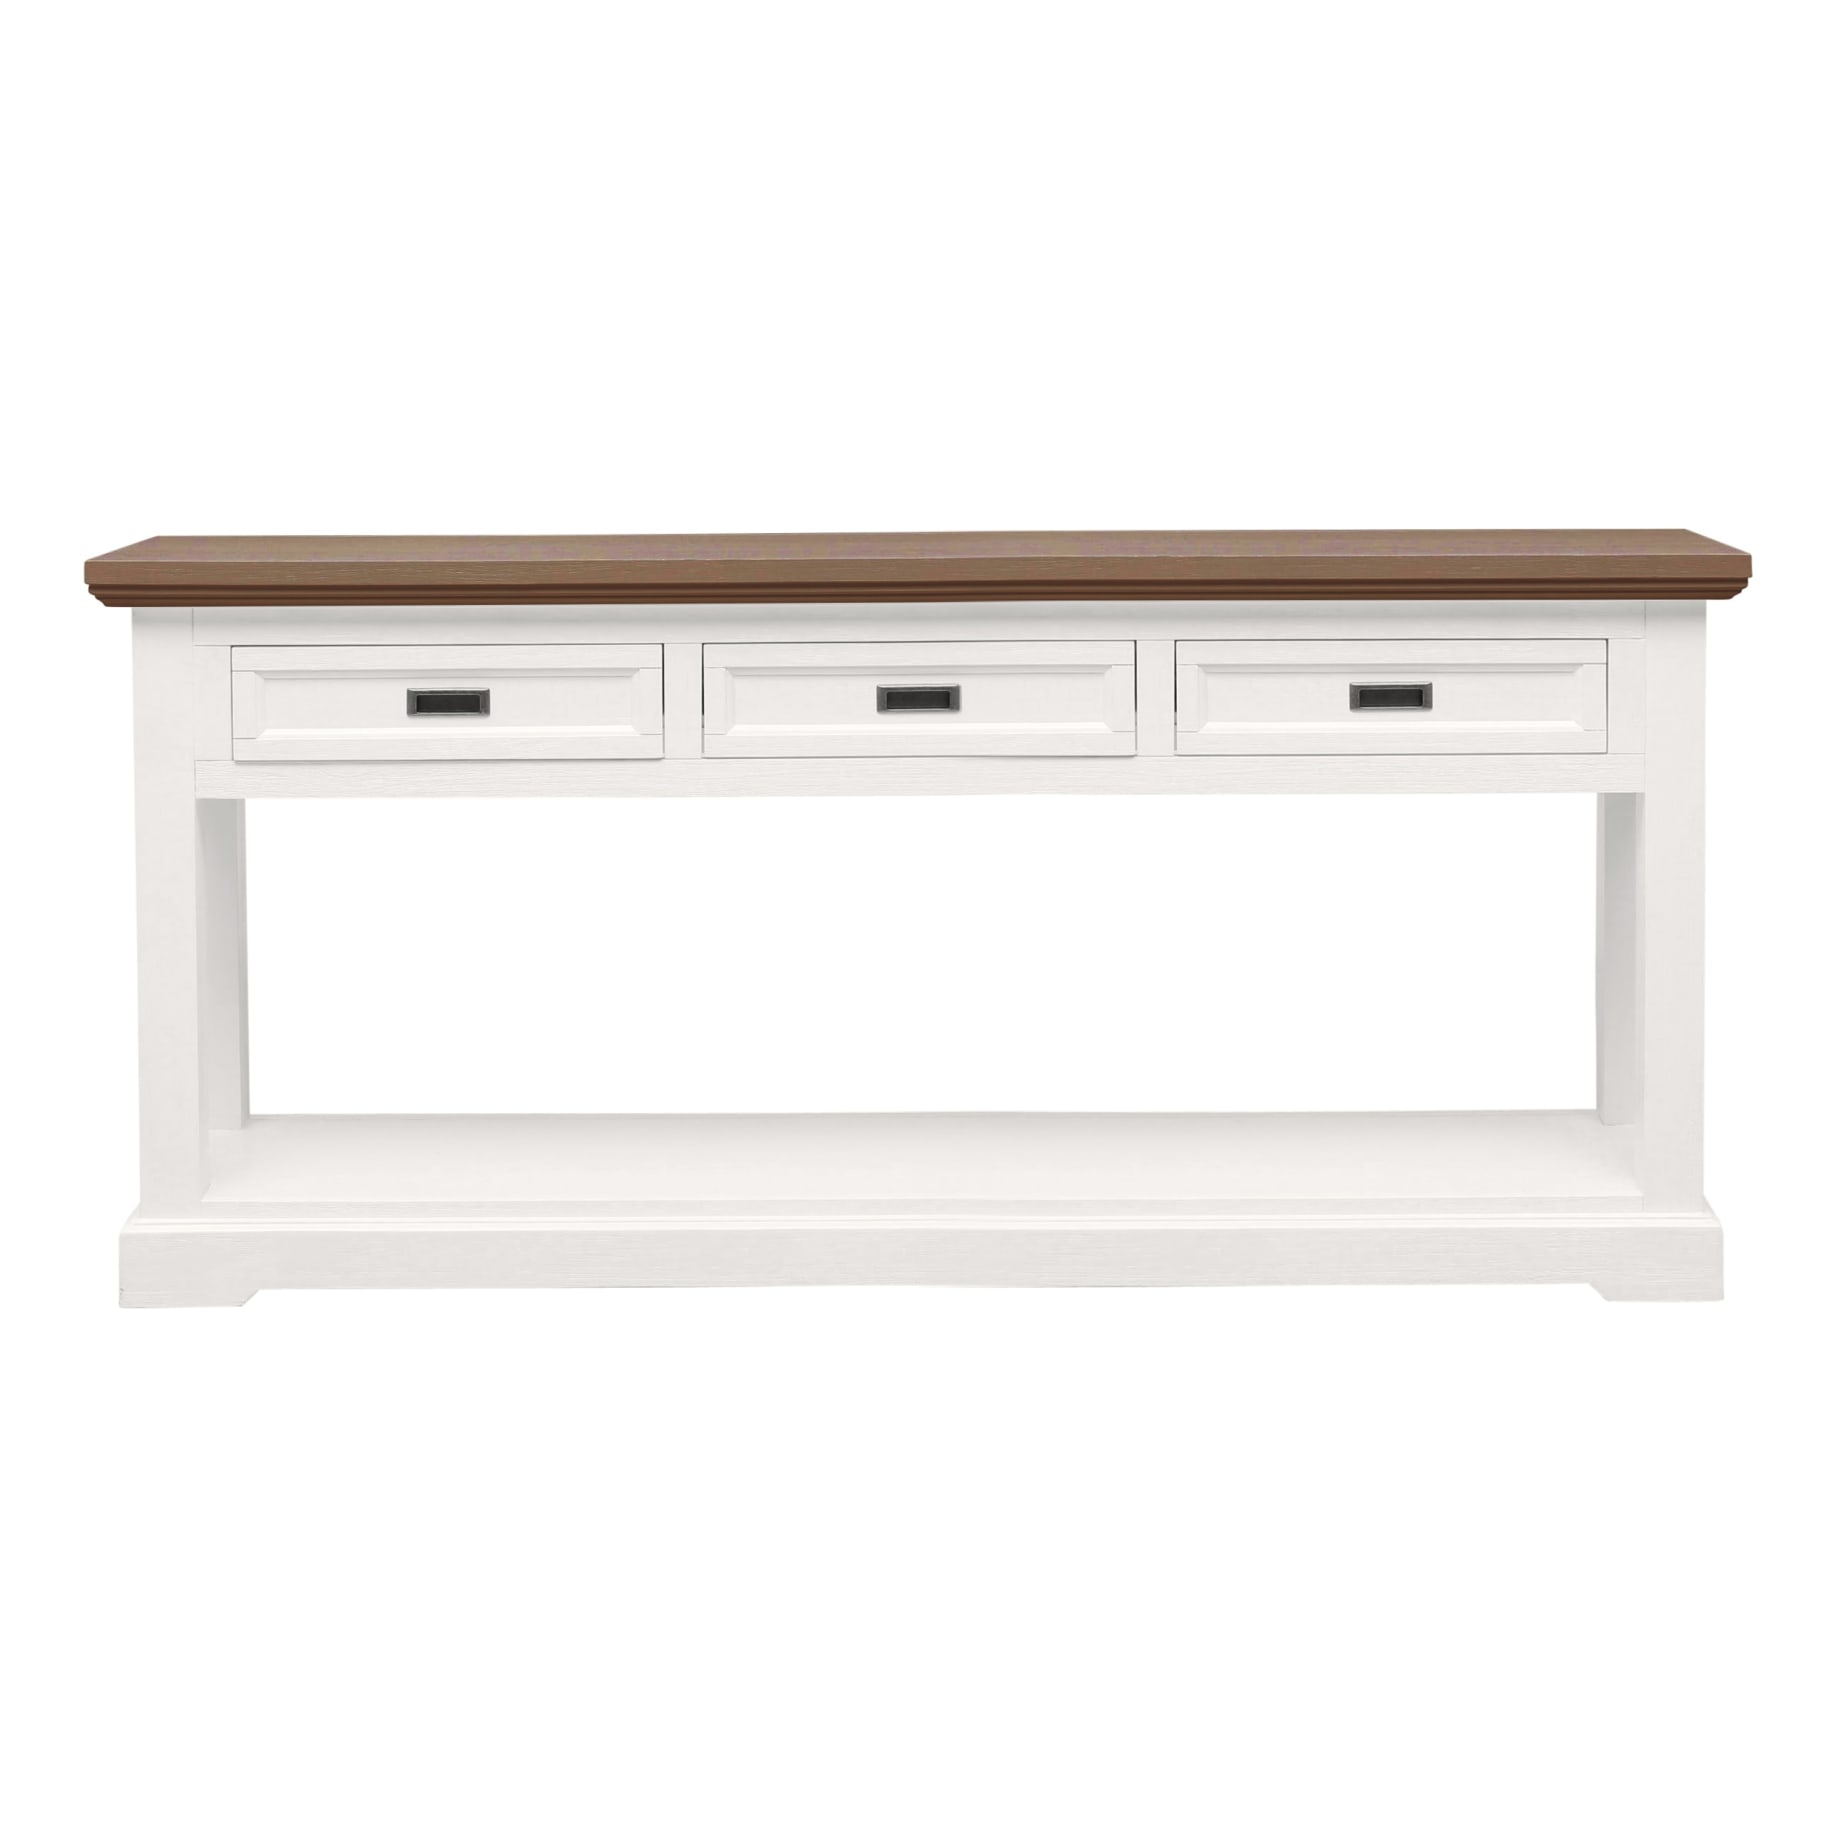 Hamptons Console Table 3 Drawer in Two Tone